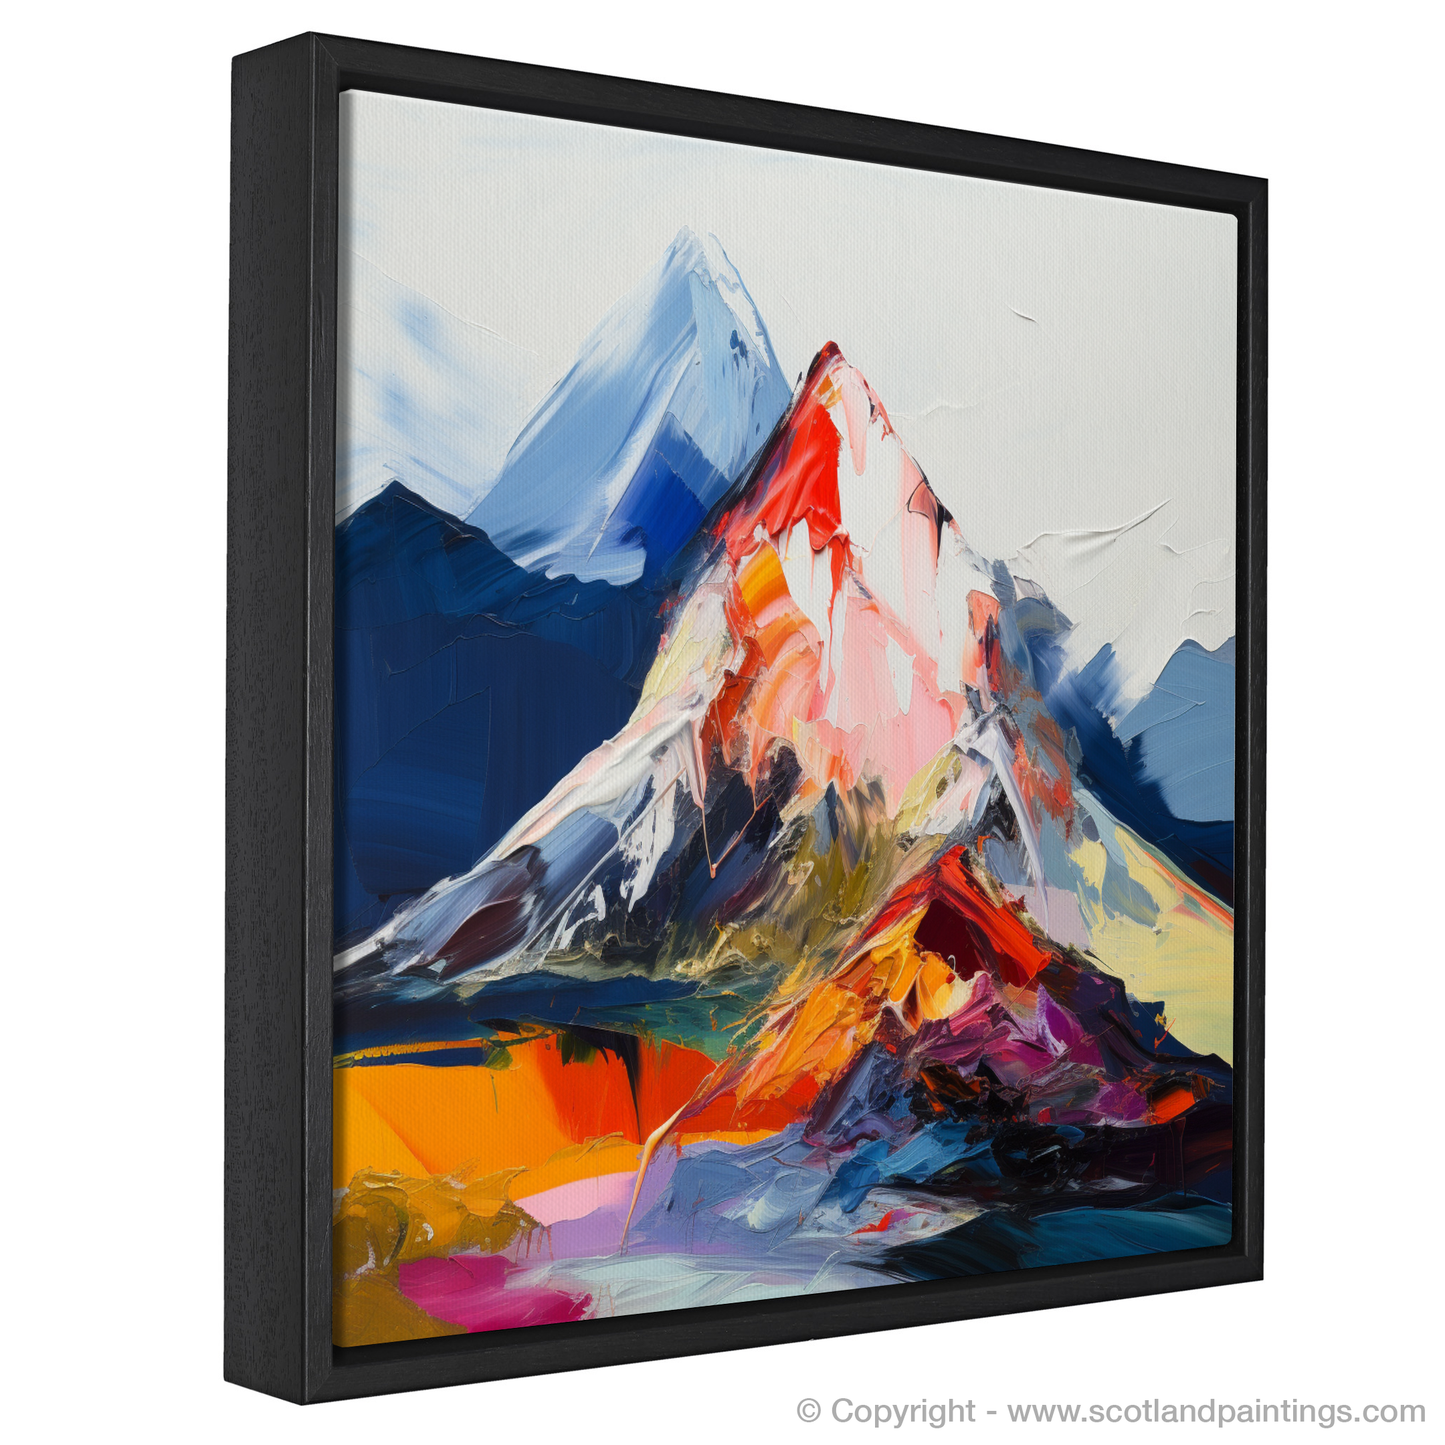 Painting and Art Print of Mount Keen entitled "Majestic Mount Keen: An Expressionist Ode to the Scottish Highlands".